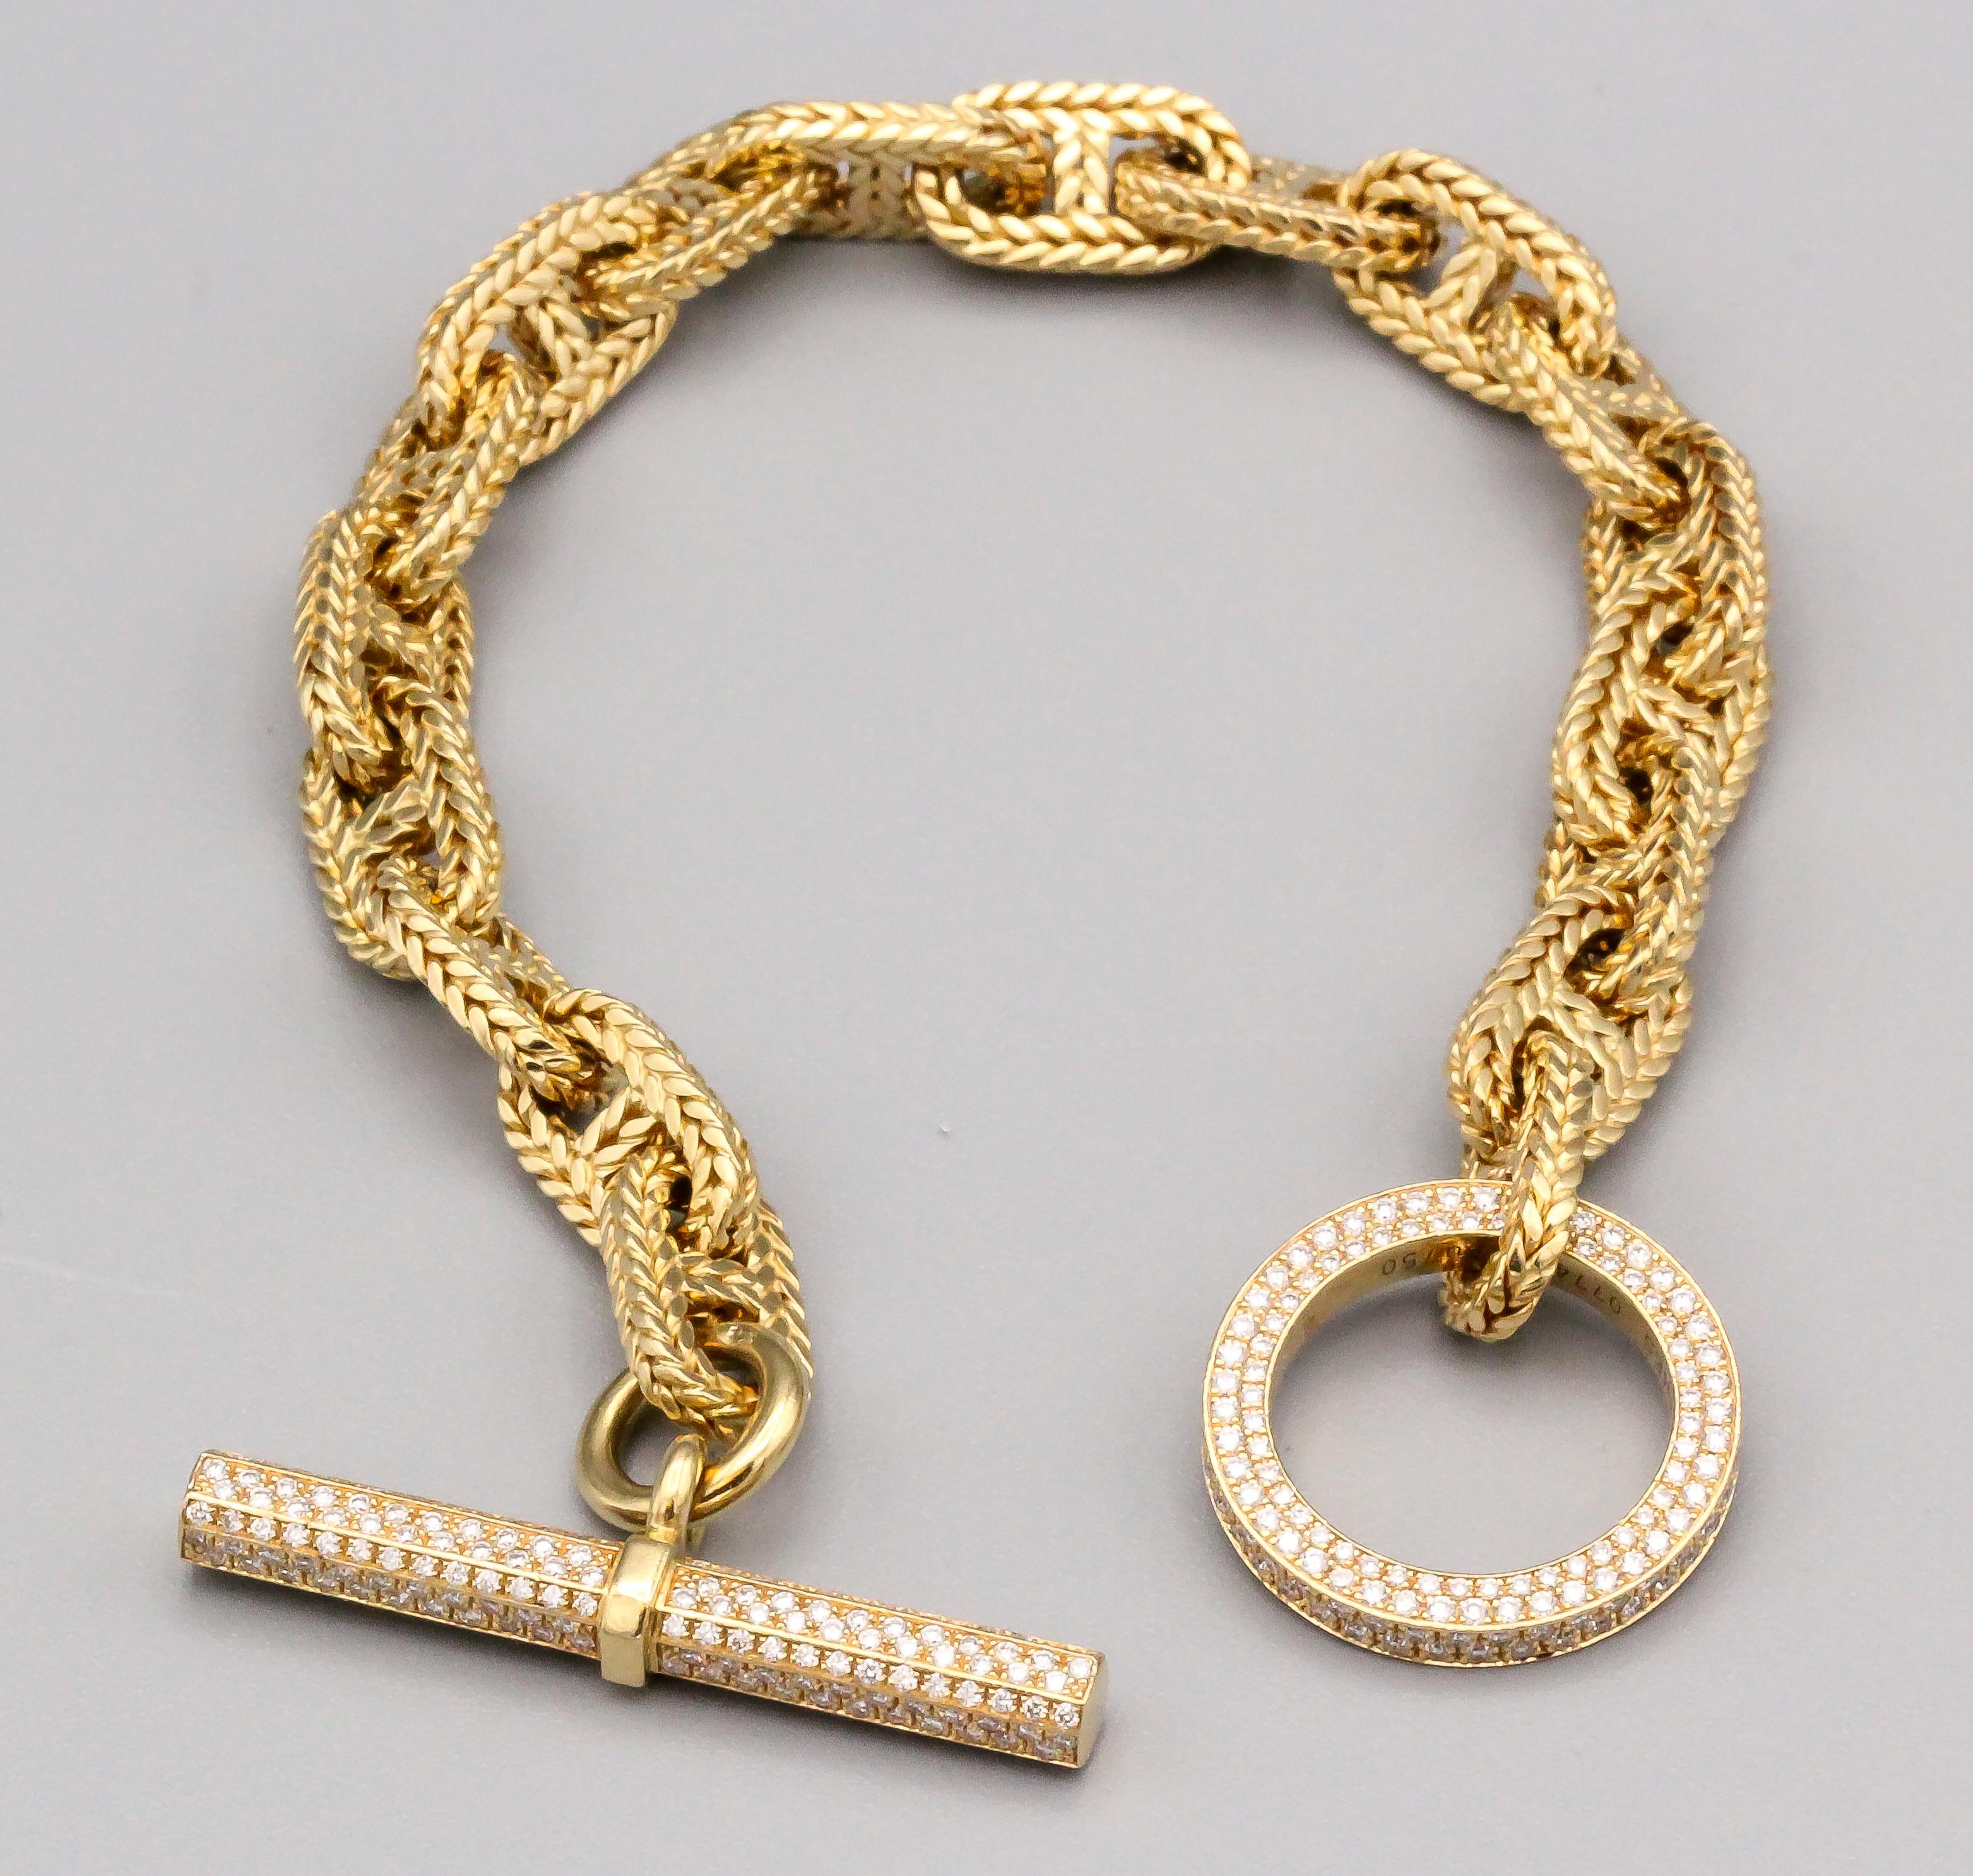 Very rare and fine diamond and 18K gold toggle link necklace from the 